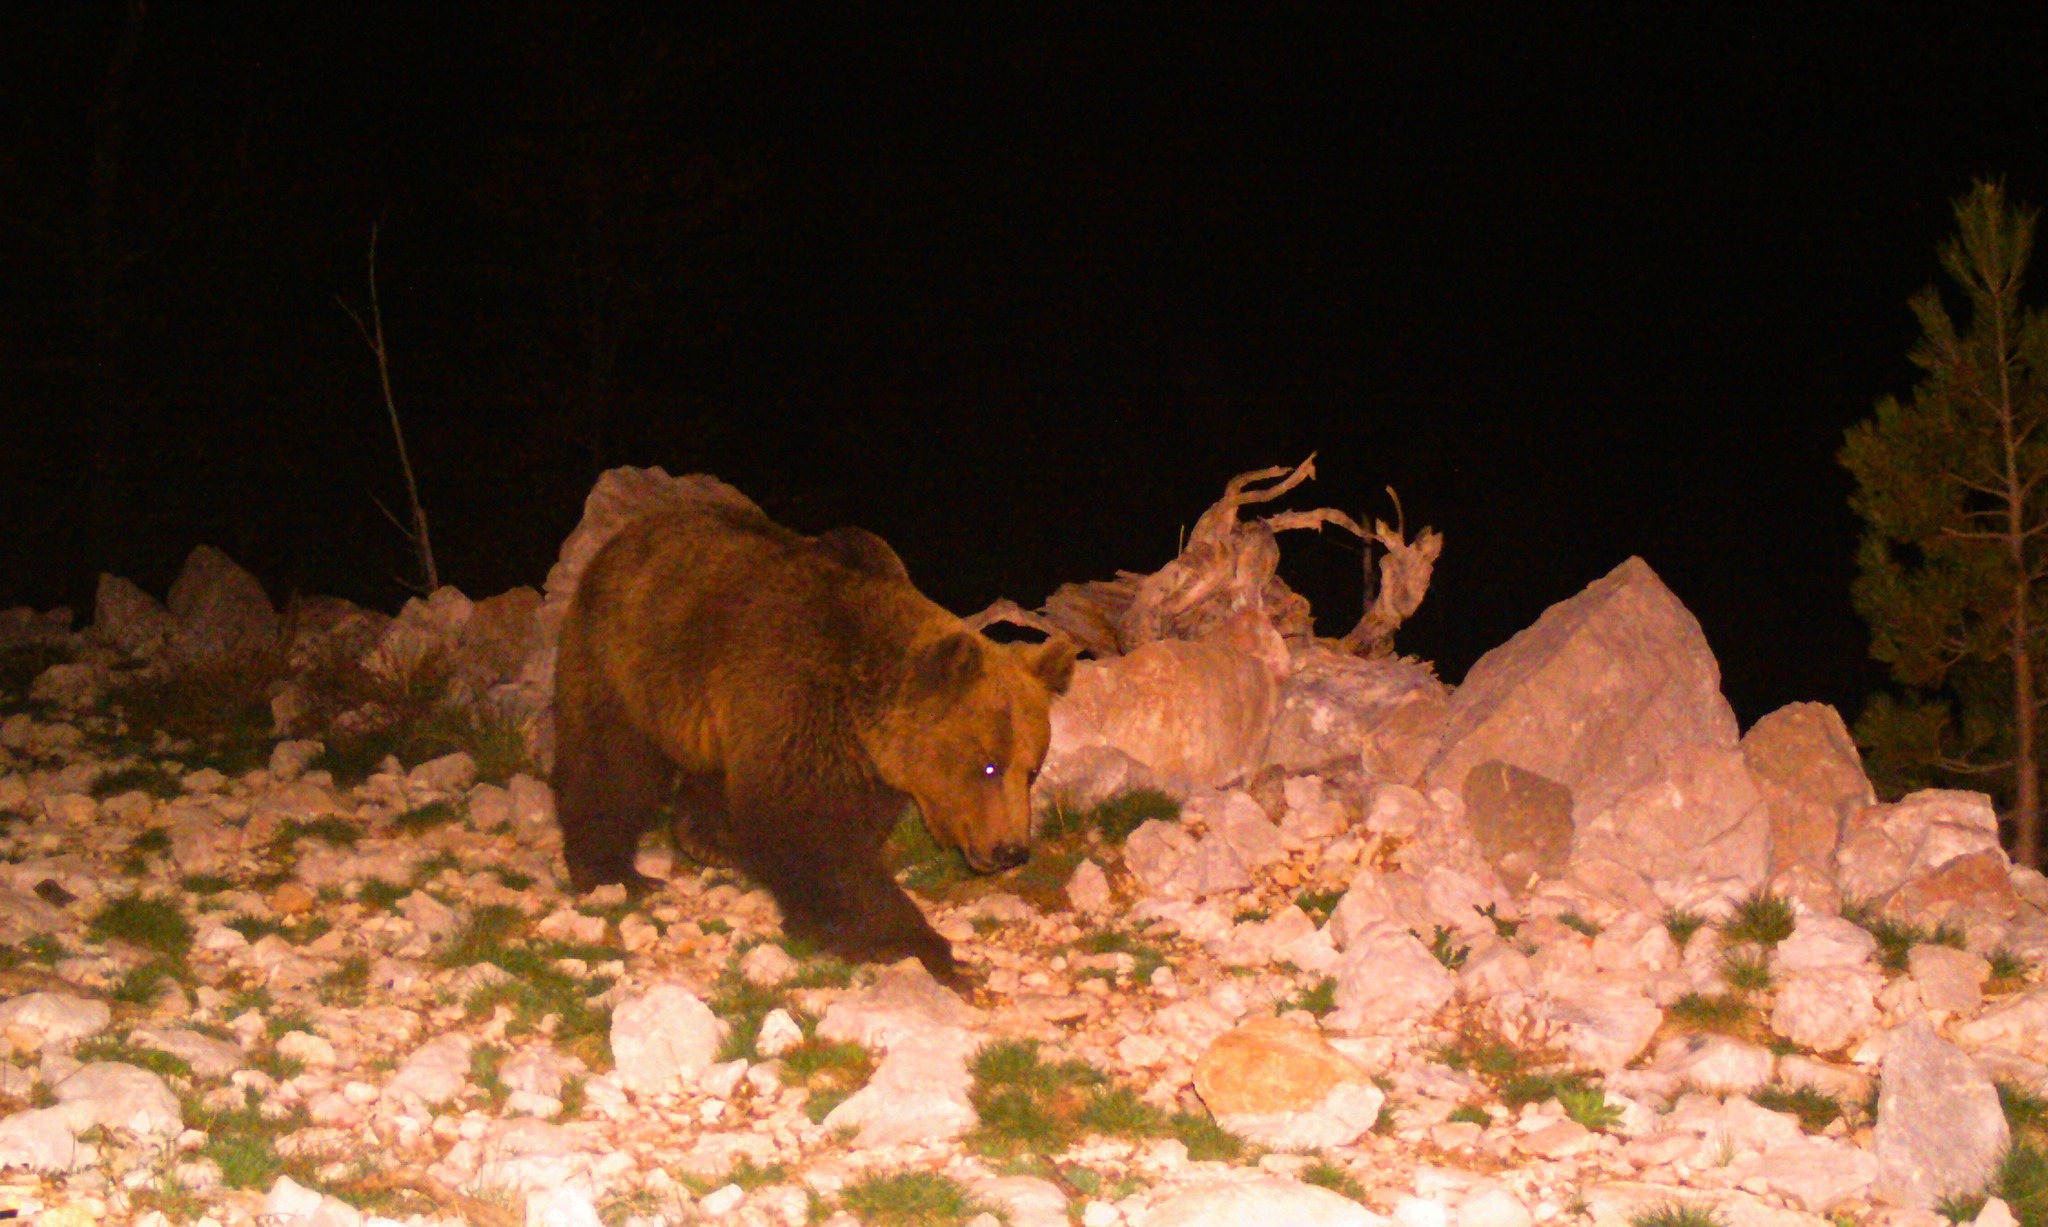 New scientific article on dietary habits of the Brown Bear (Ursus arctos) in the transboundary Prespa basin